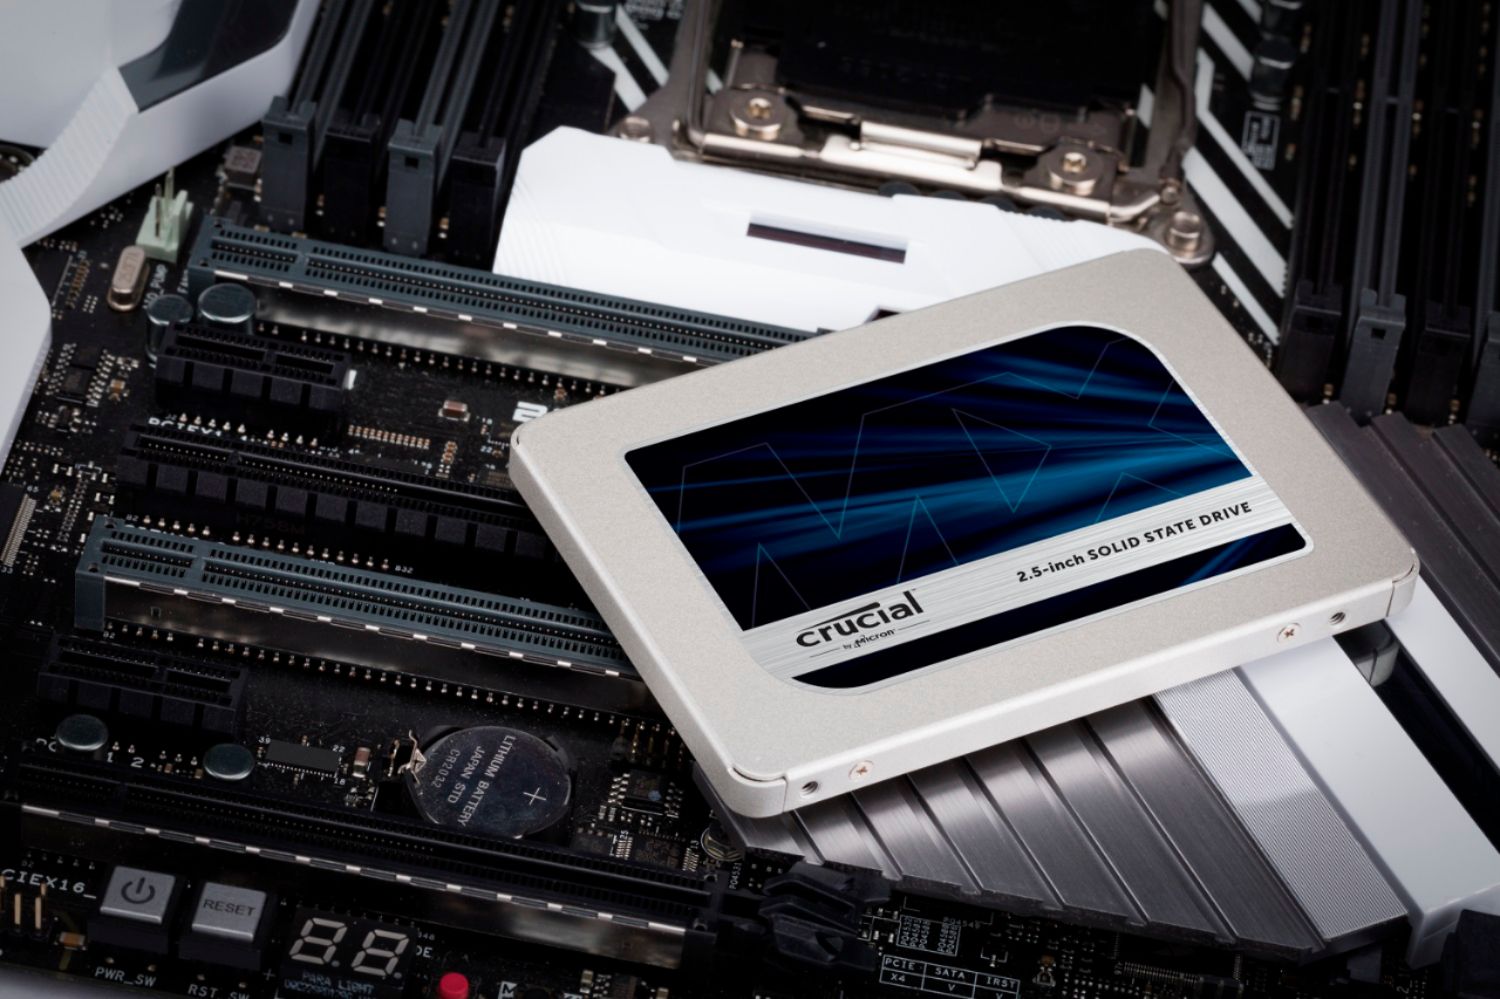 Seagate Barracuda 2.5-inch SATA SSD review: Great performance—with caveats